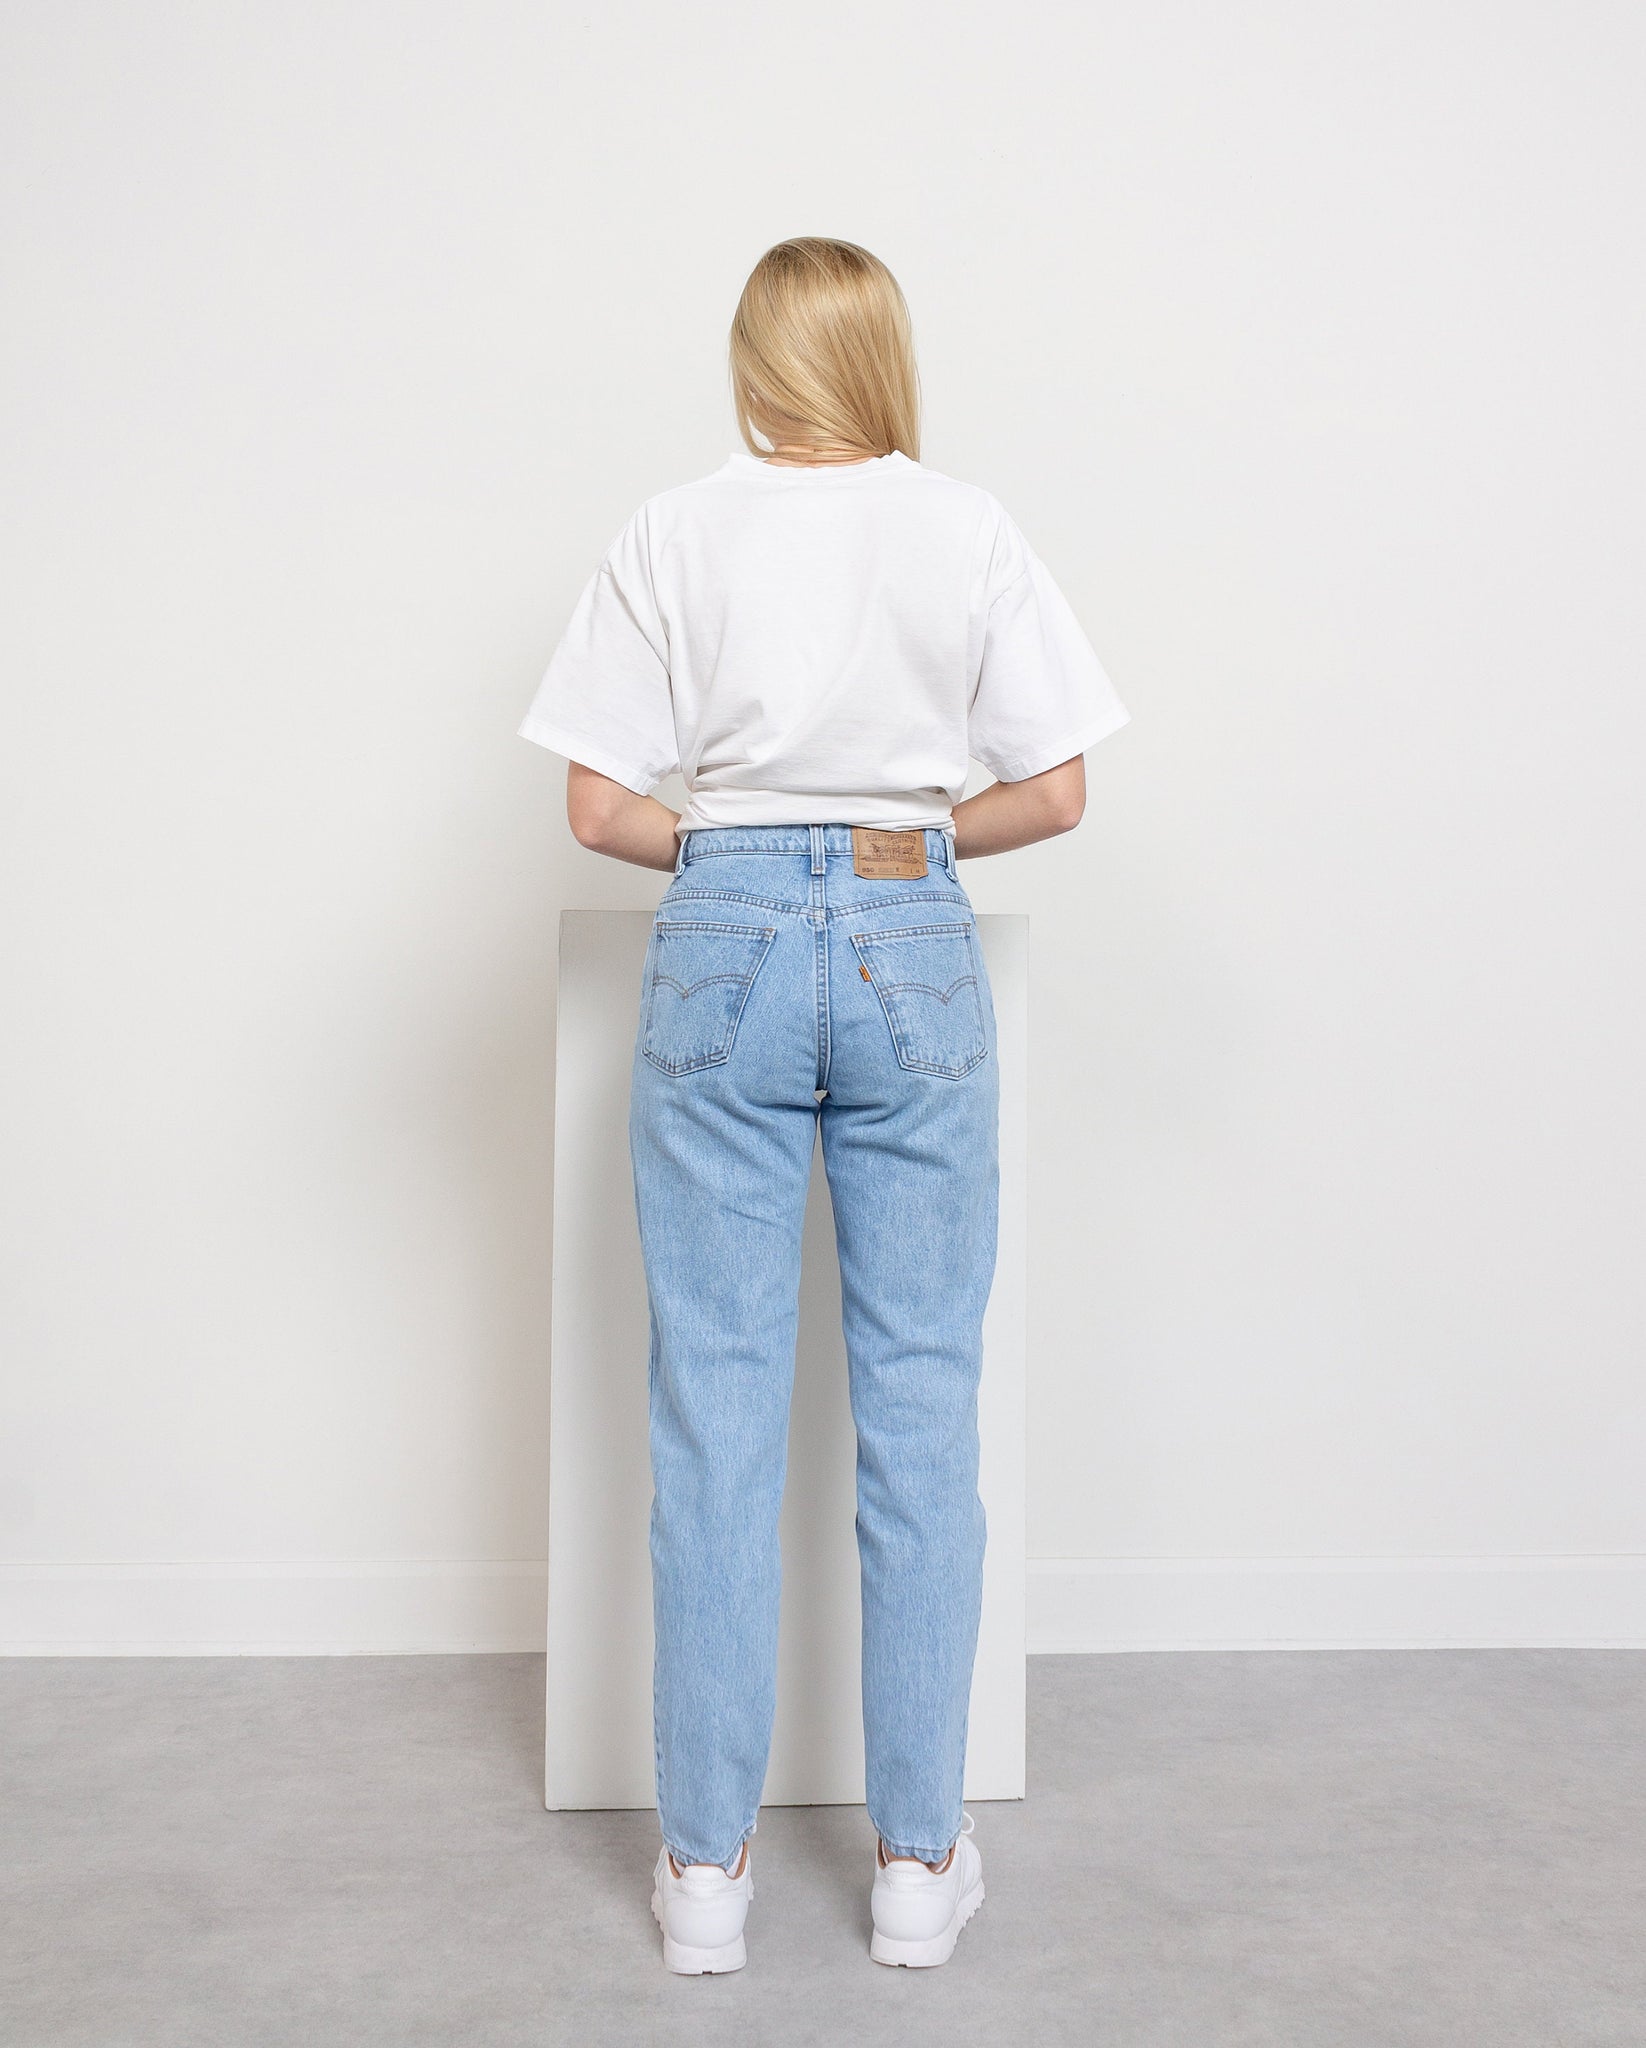 Vintage Levi's 950 Jeans For Women – Better Stay Together